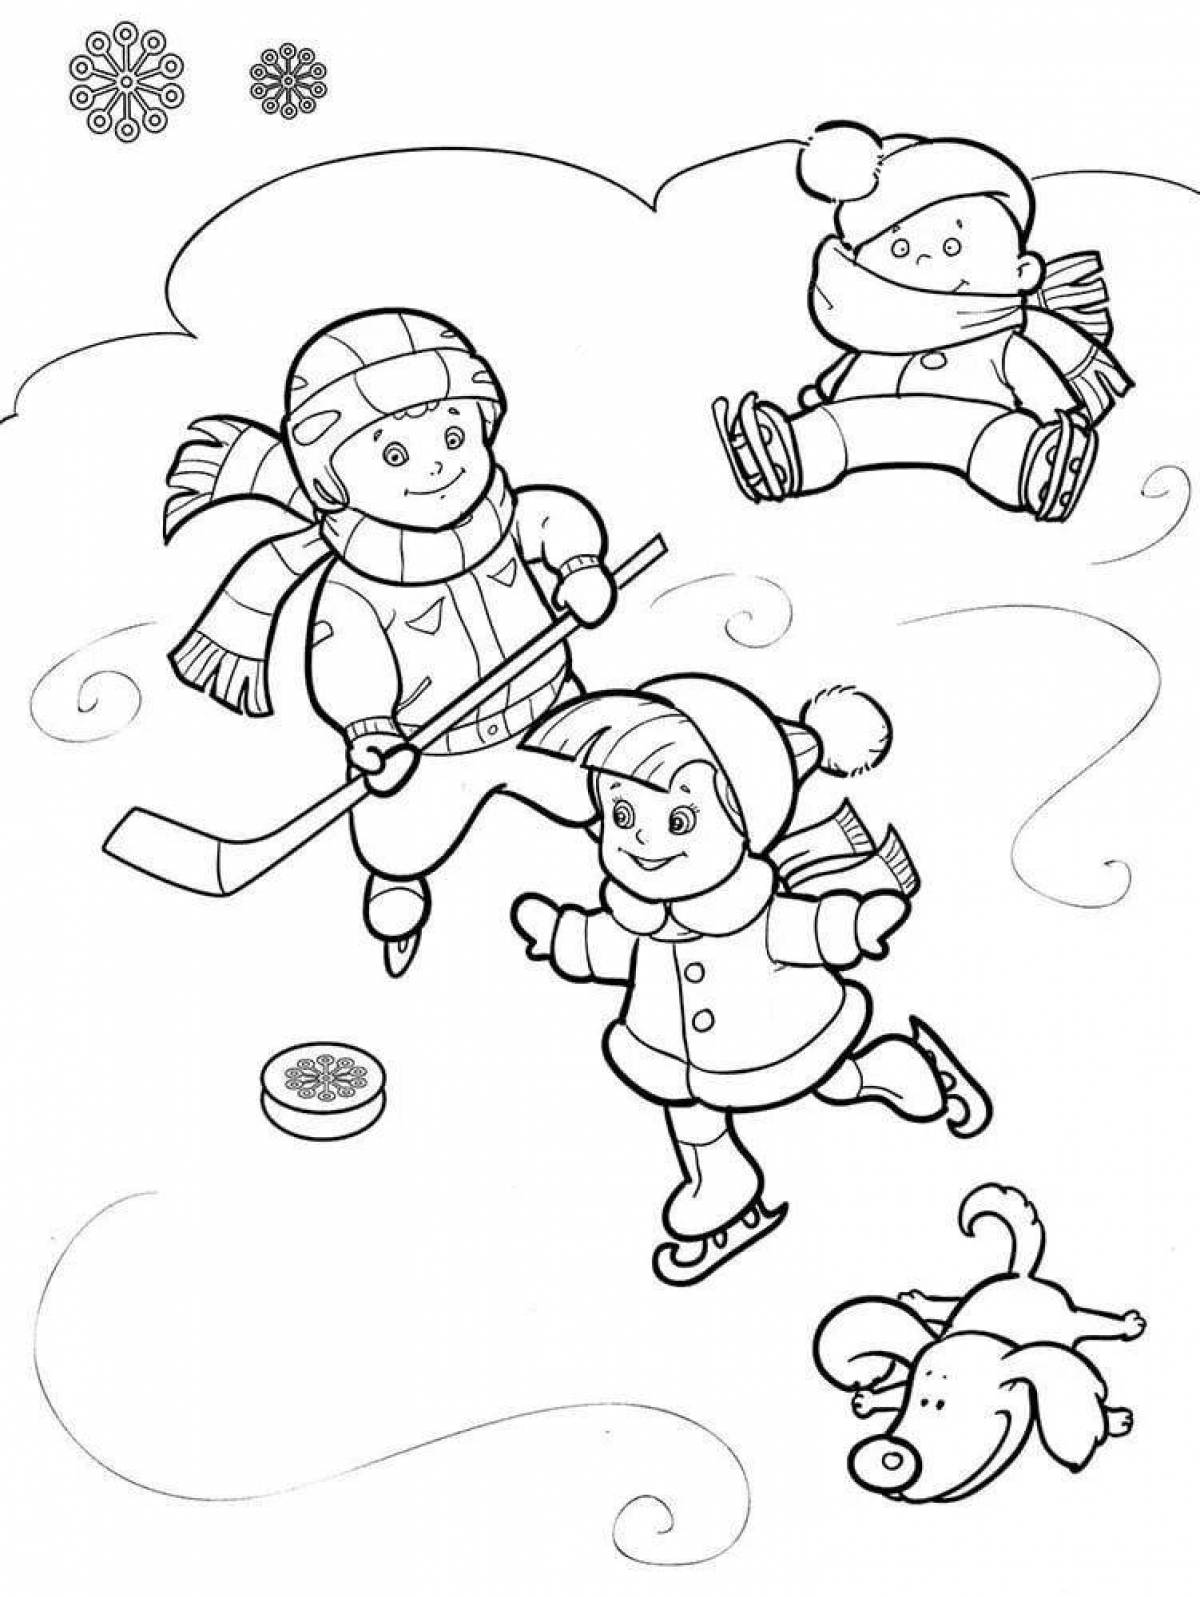 Holiday winter sports coloring page